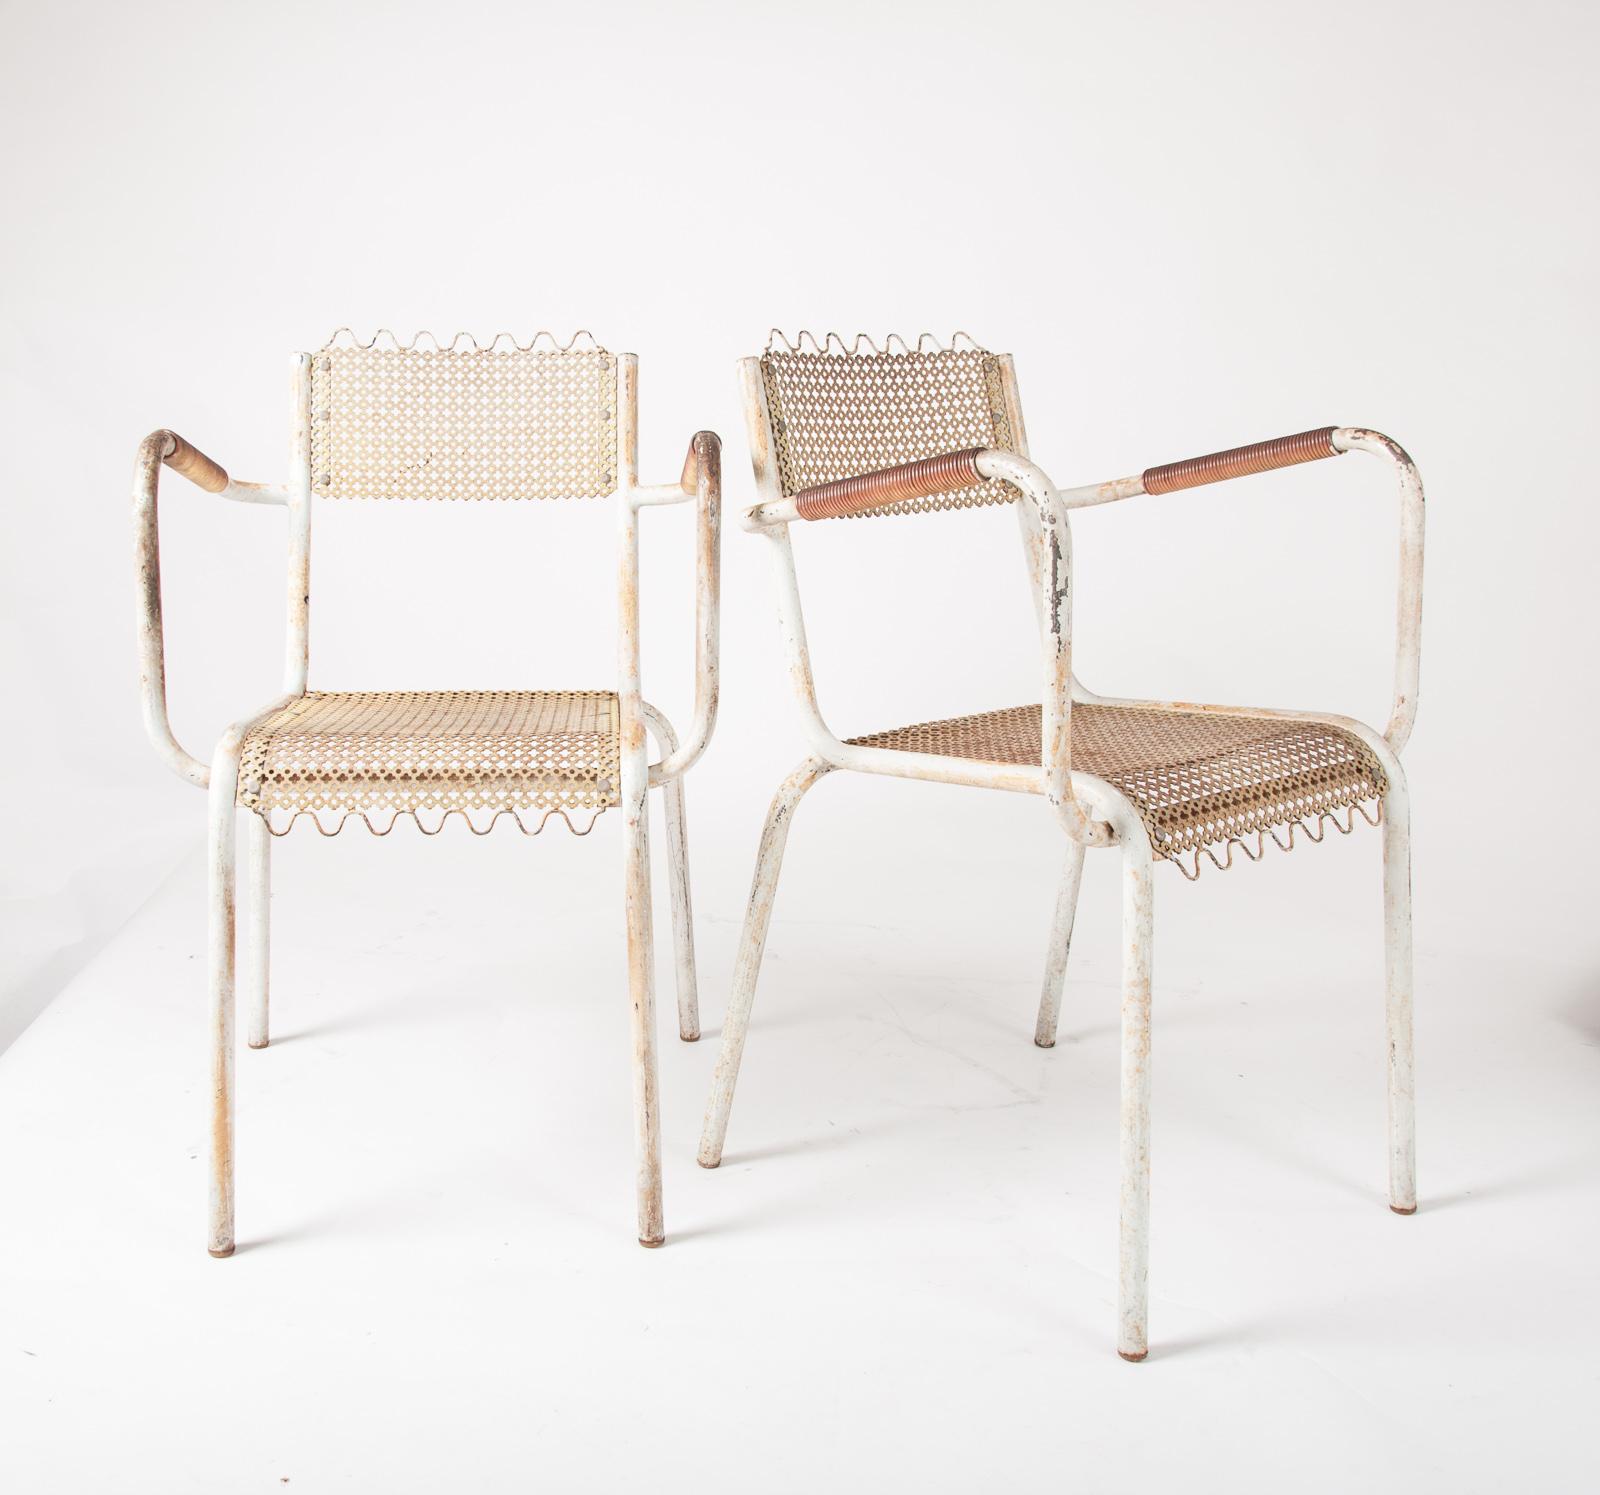 Pair of French metal armchairs in the style of Mathieu Matégot with tubular steel frames, nylon wrapped arms and perforated steel seats and backs riveted to the frames, France, circa 1950

(Priced for the pair).
 